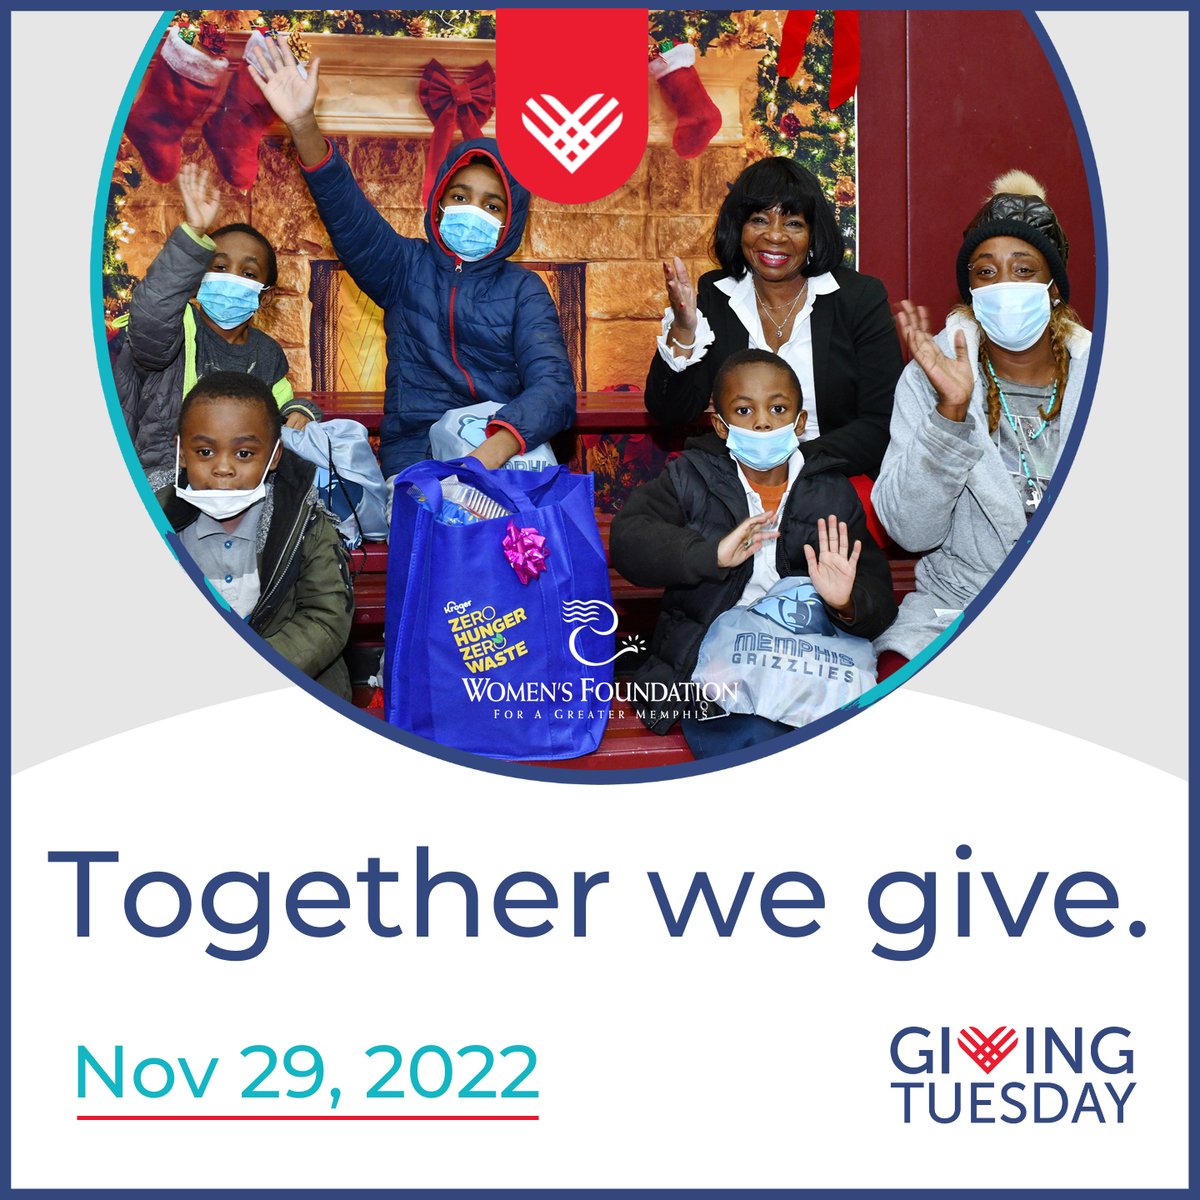 #GivingTuesday is here and we need YOUR help to raise $10,000 to bring joy and hope to 200 families in need. Your gift will provide a family with a $50 gift card to make a child's holiday wish come true or to purchase essentials. Any amount will help! wfgm.org/donate